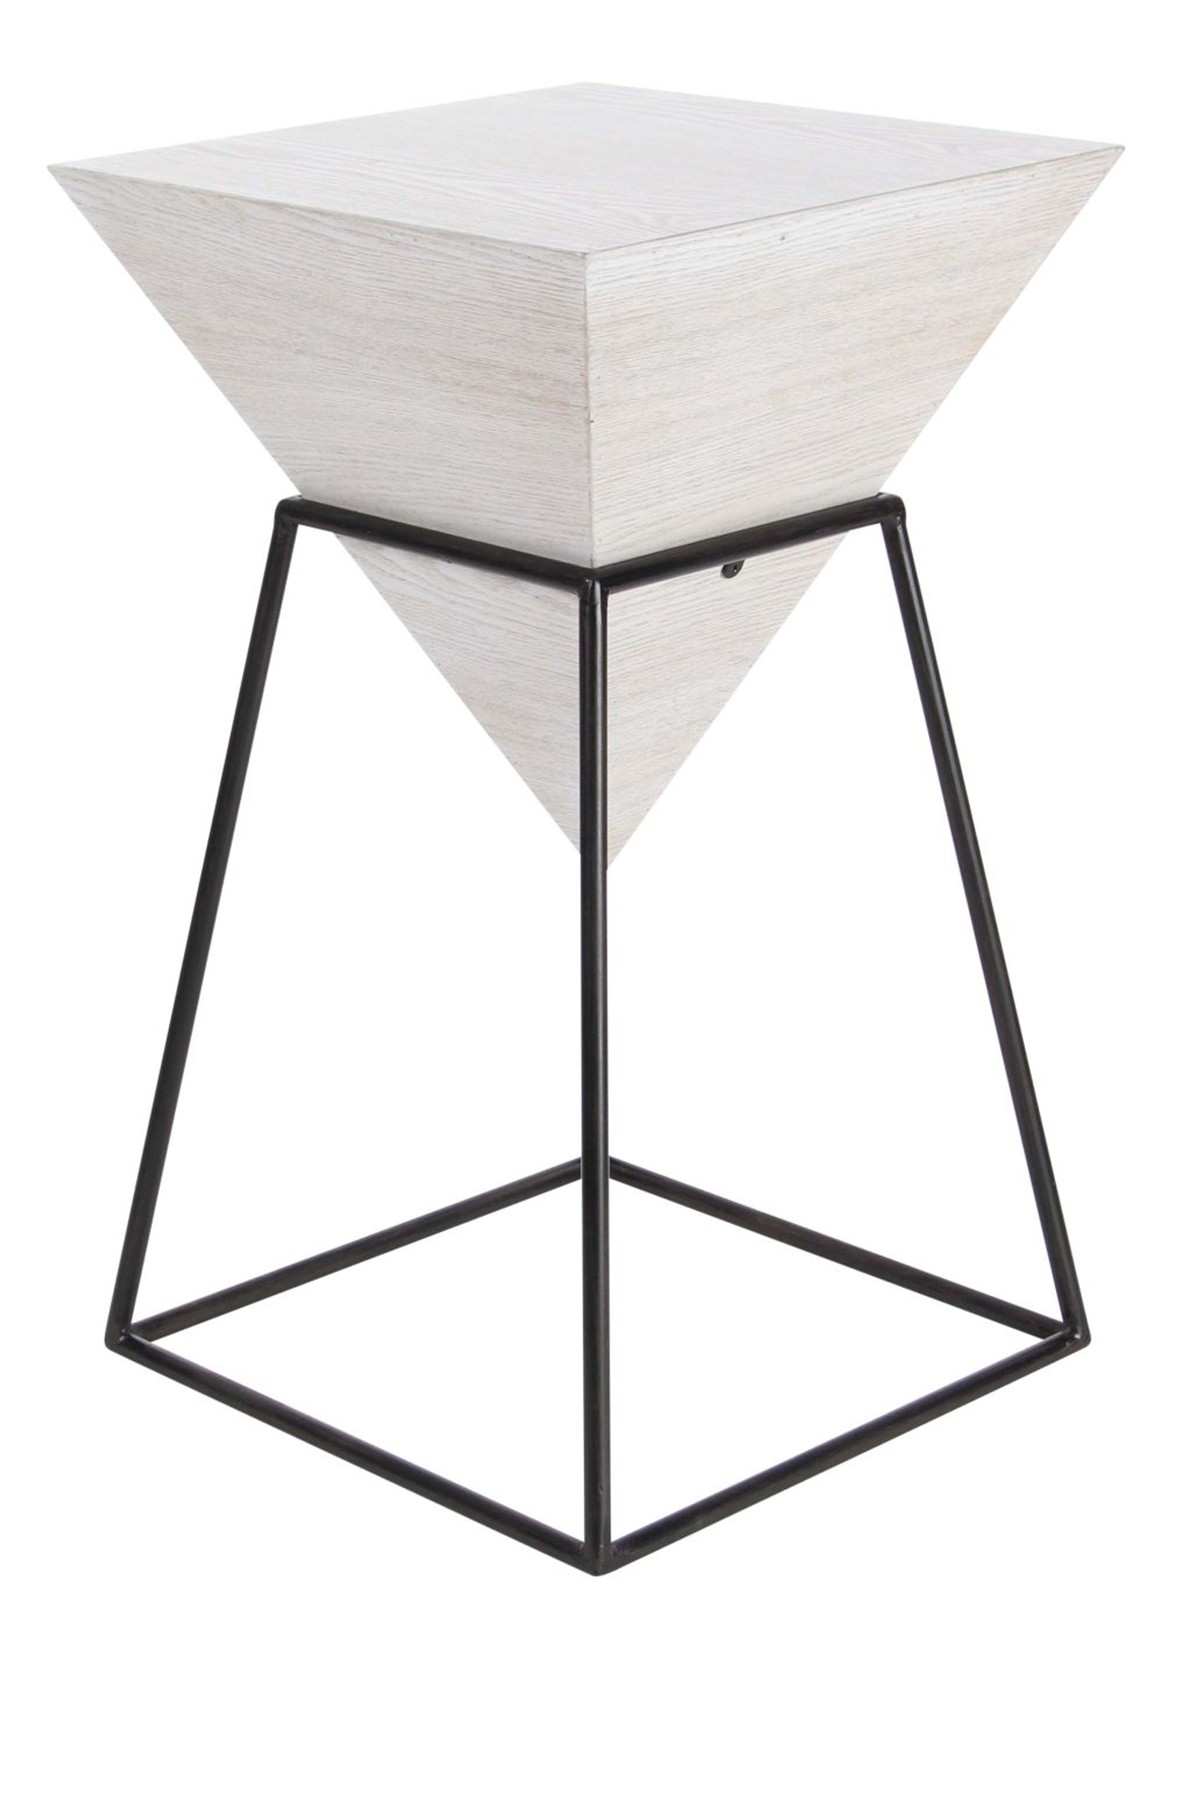 uma wood metal accent table nordstrom rack ocean themed chandelier grey coffee set inch nightstand small wicker chair entrance console hampton bay patio unique outdoor tables